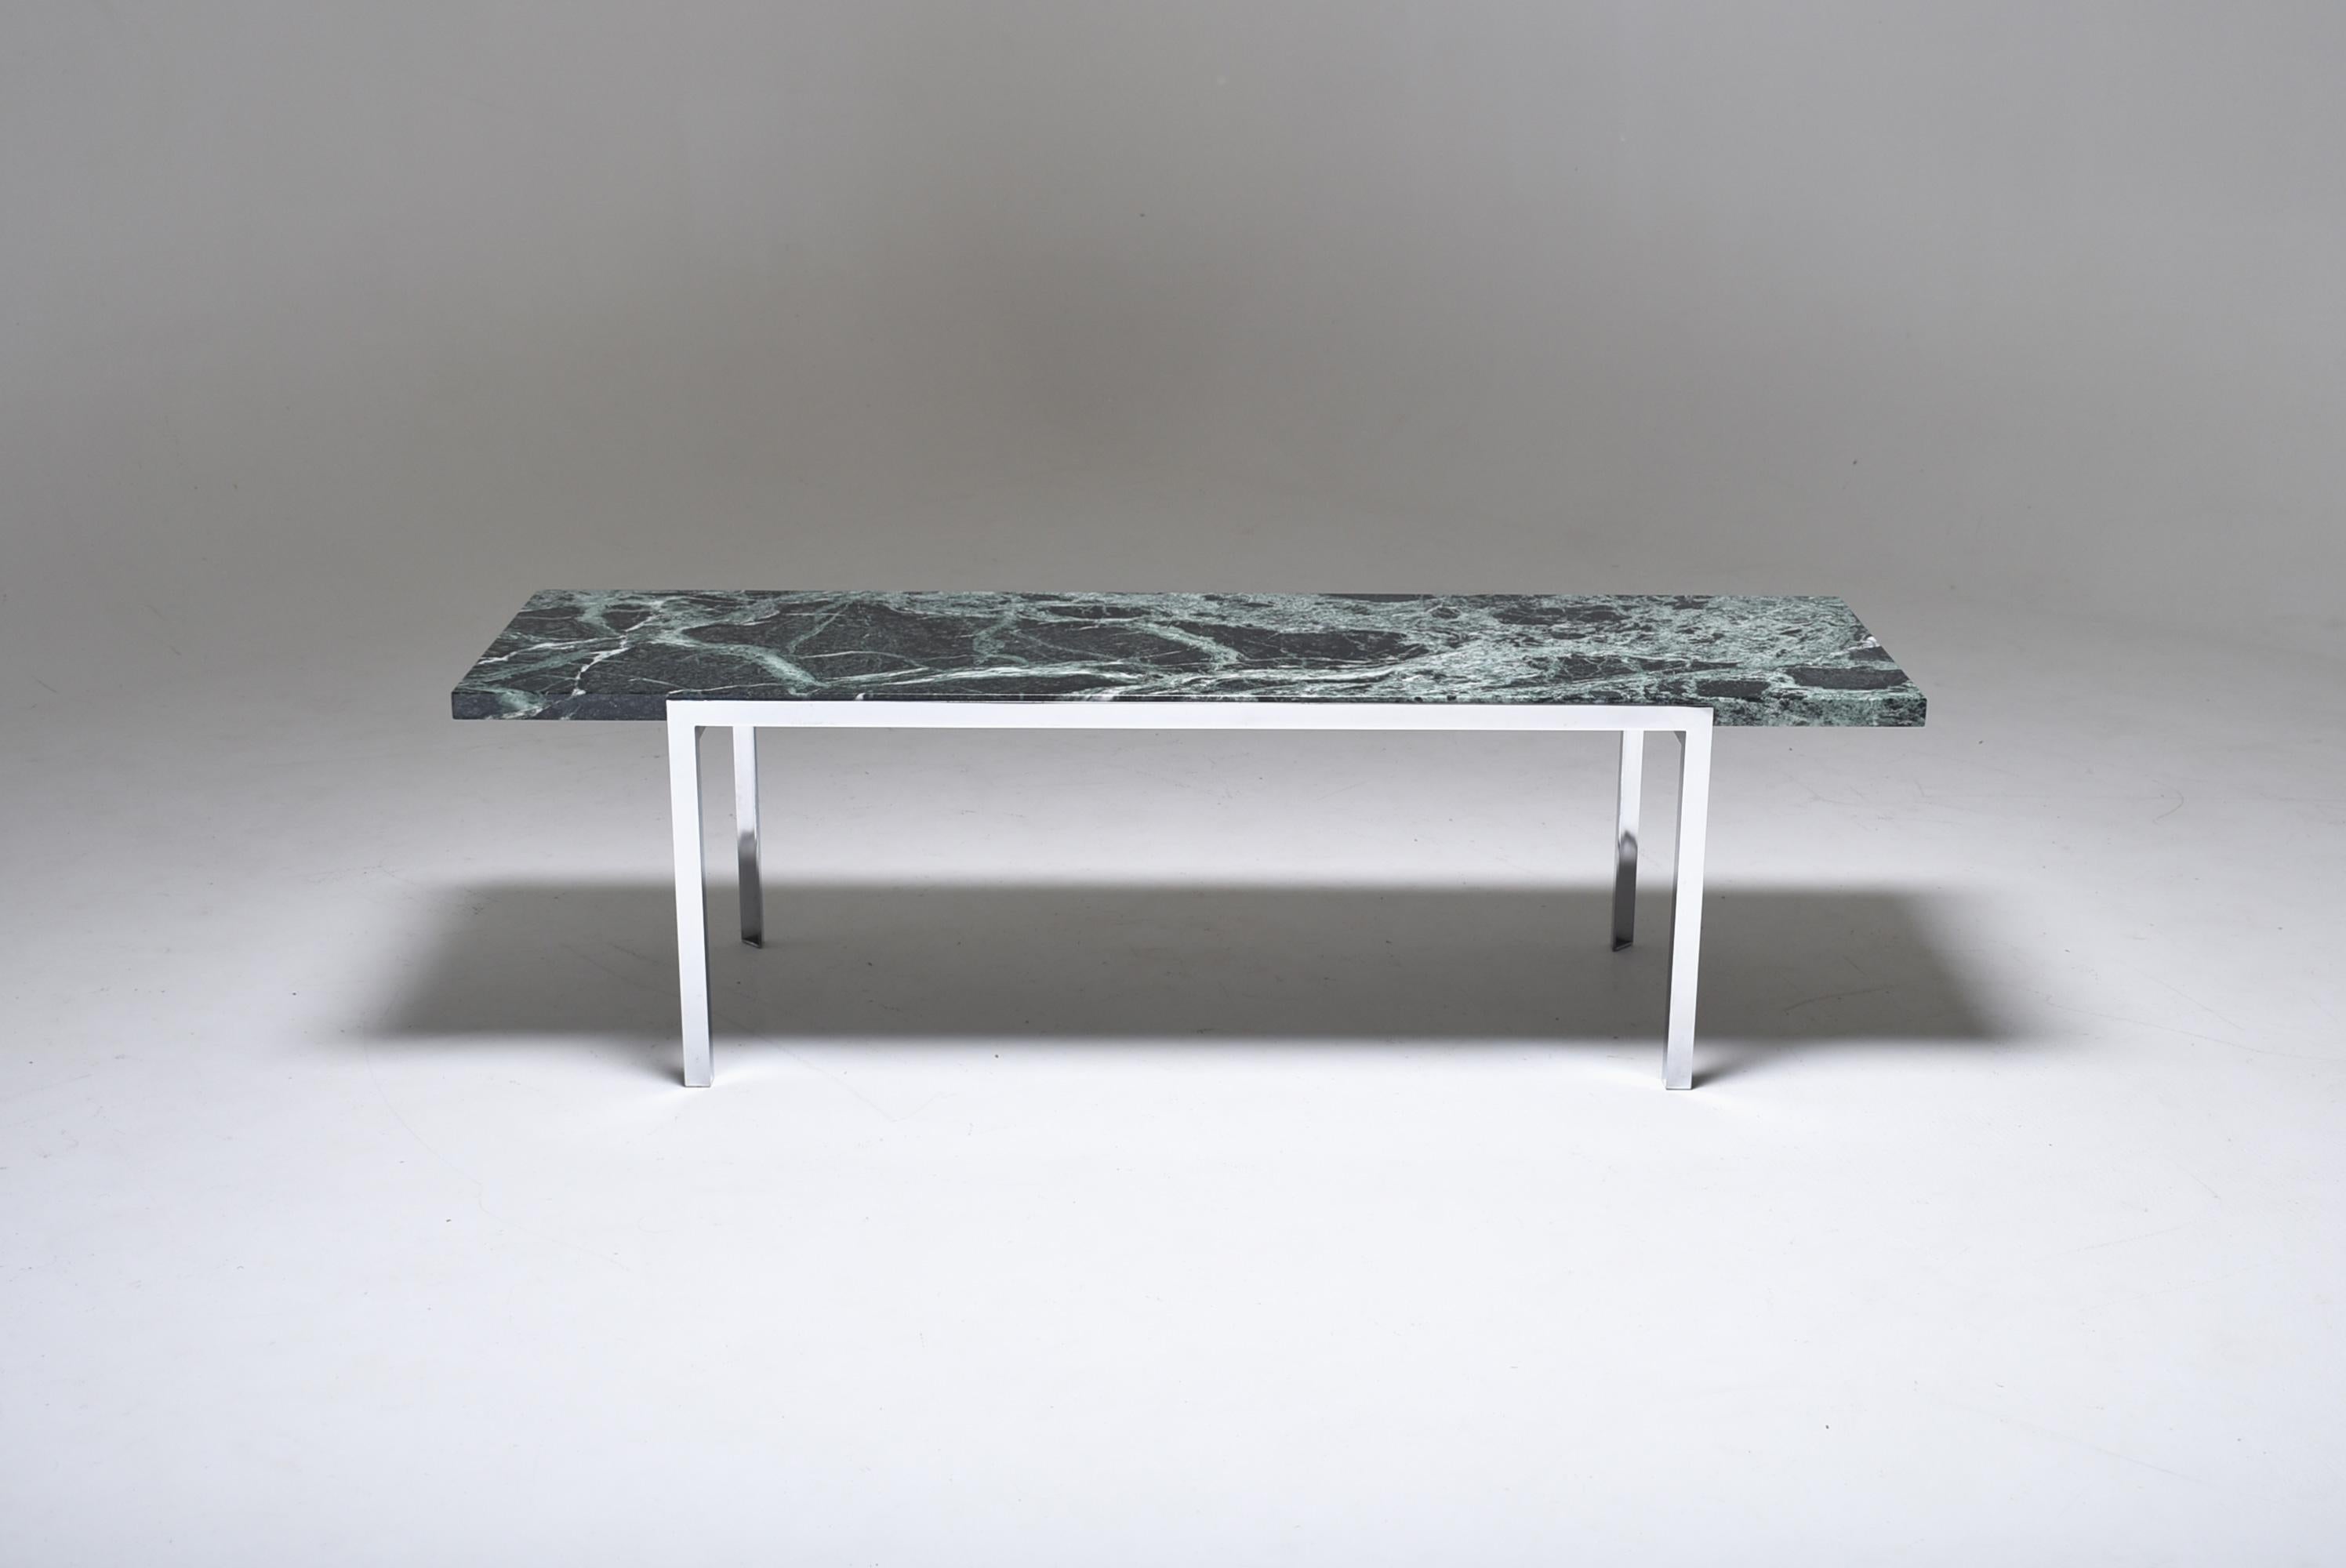 Well proportioned coffee table, with a top of Alpi Verde marble sitting on chrome structure.
Elegant fitting, the top seems to float over the legs.
Beautiful green marble from the Alps, with nice patterns.
The top is in excellent condition, and